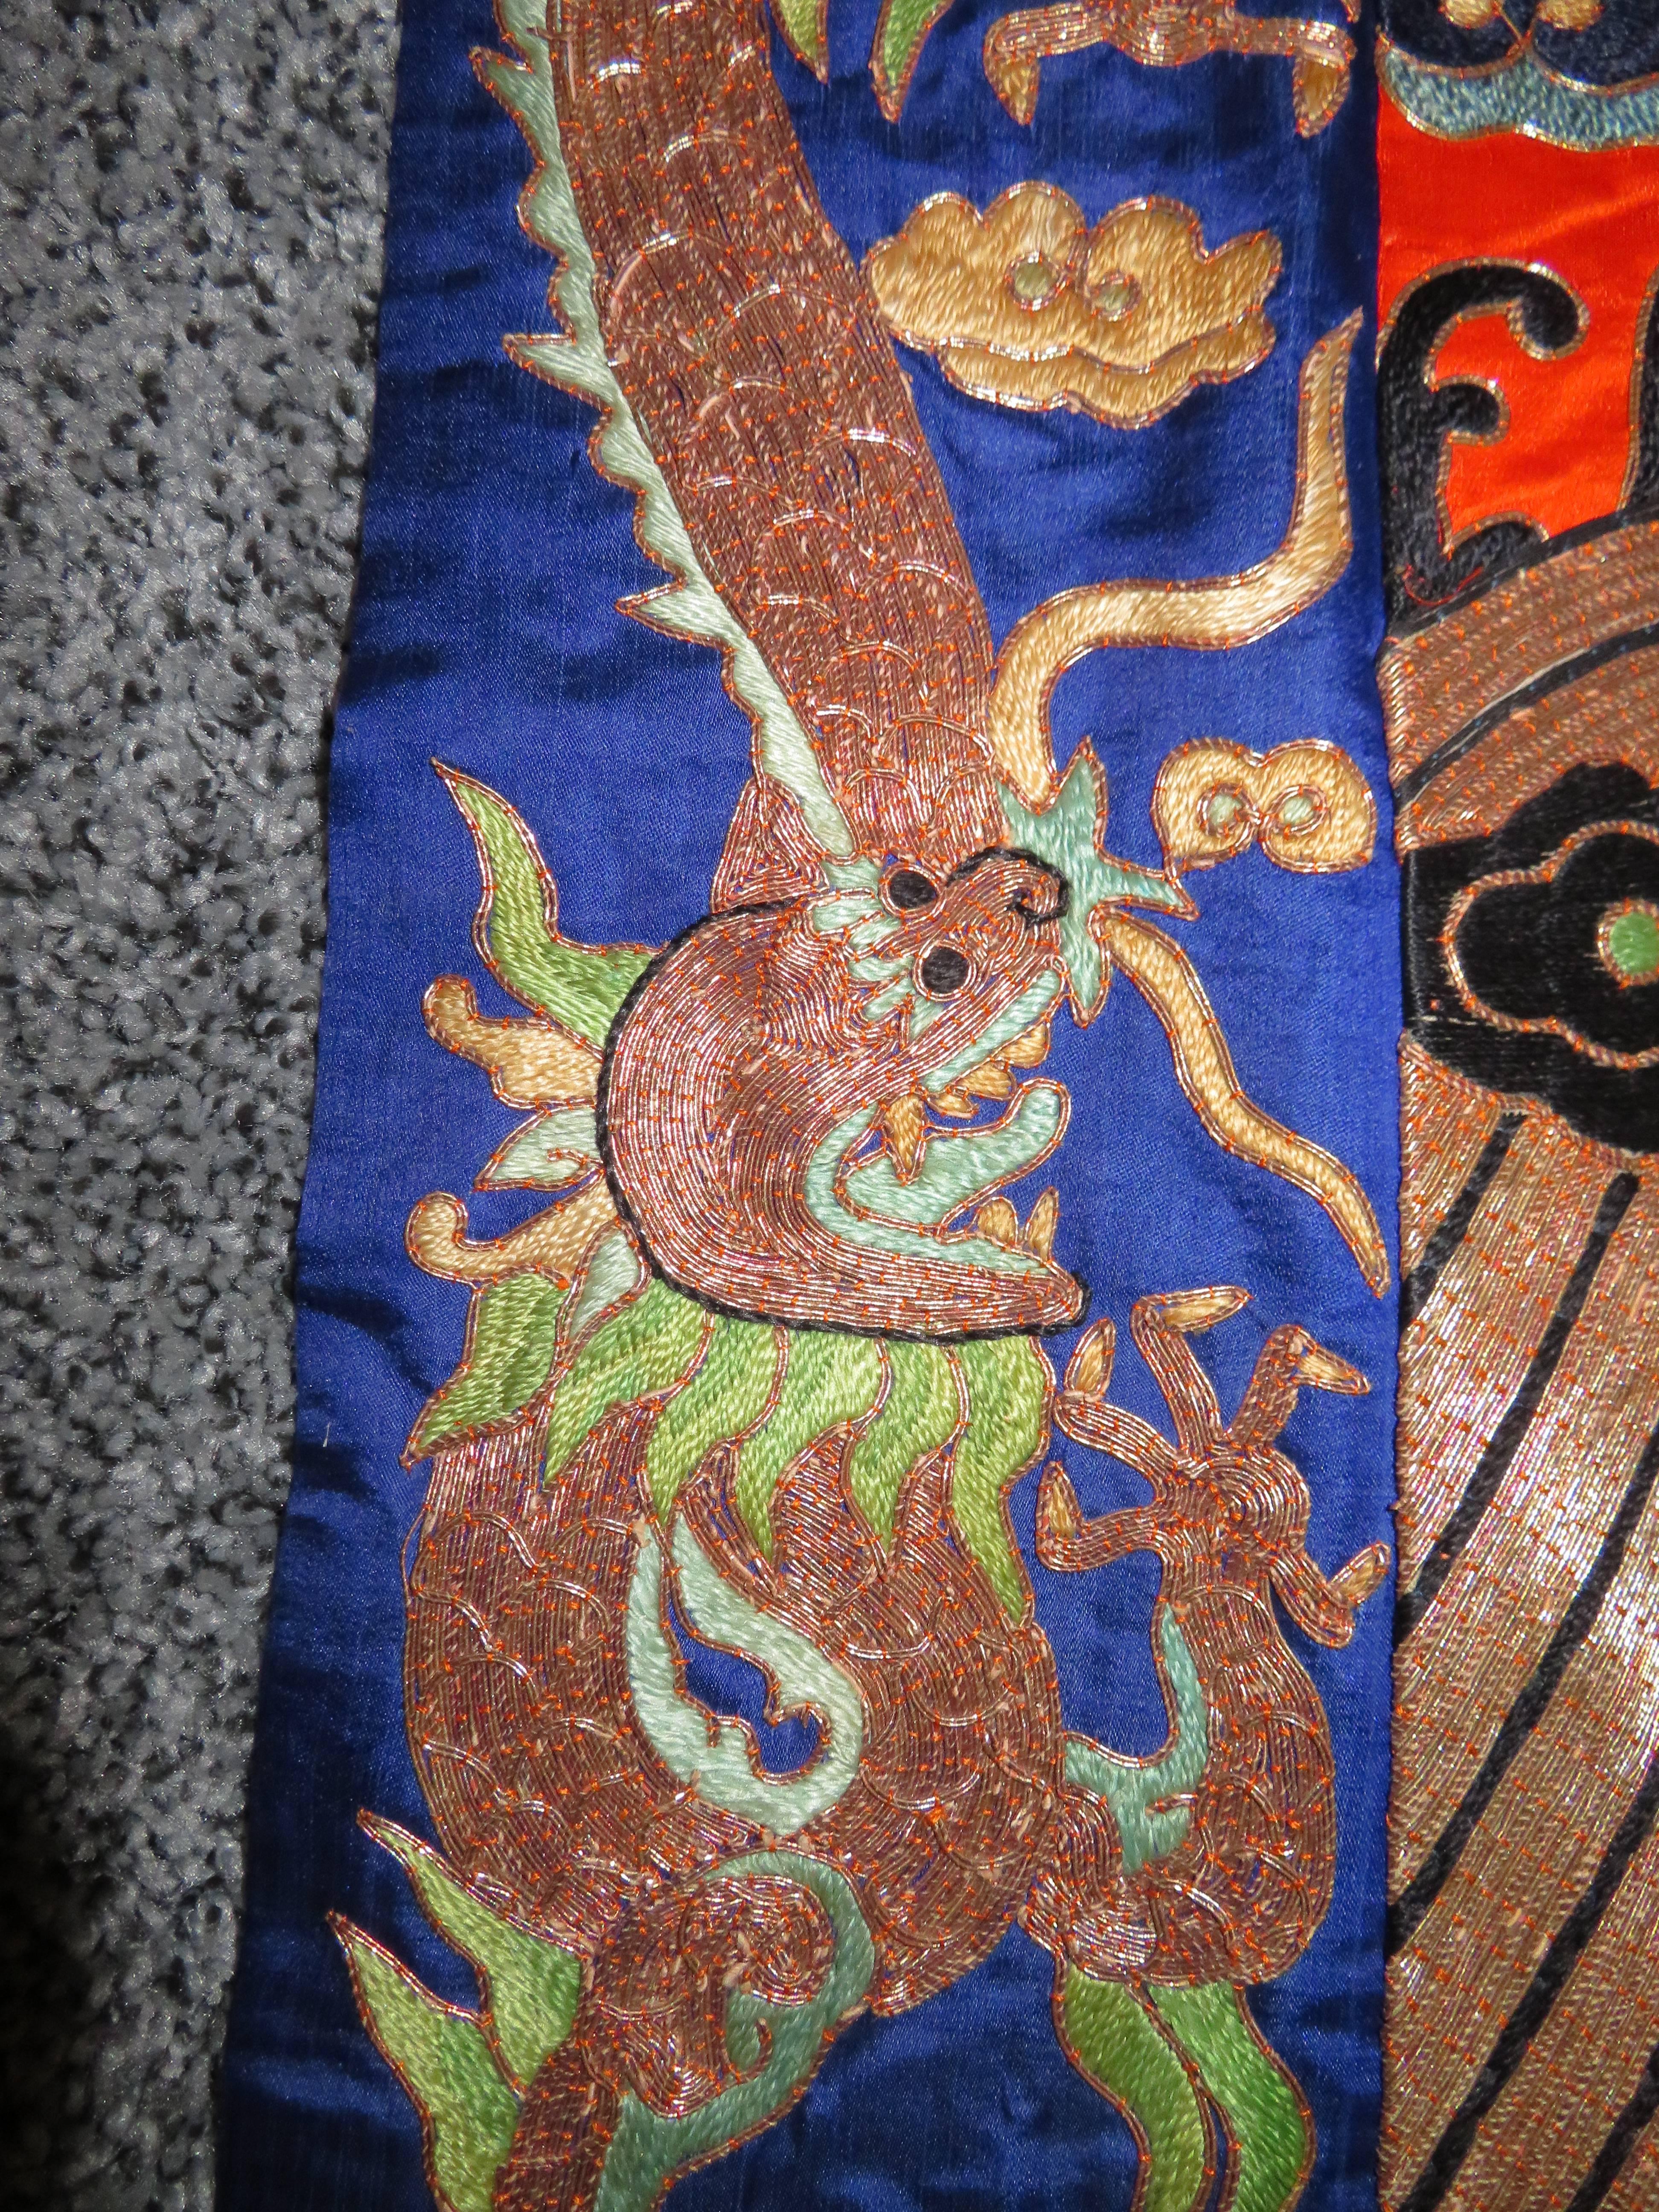 Other Stunning Chinese Silk Gold Thread Embroidered Dragon Kimono Robe Wall Hanging